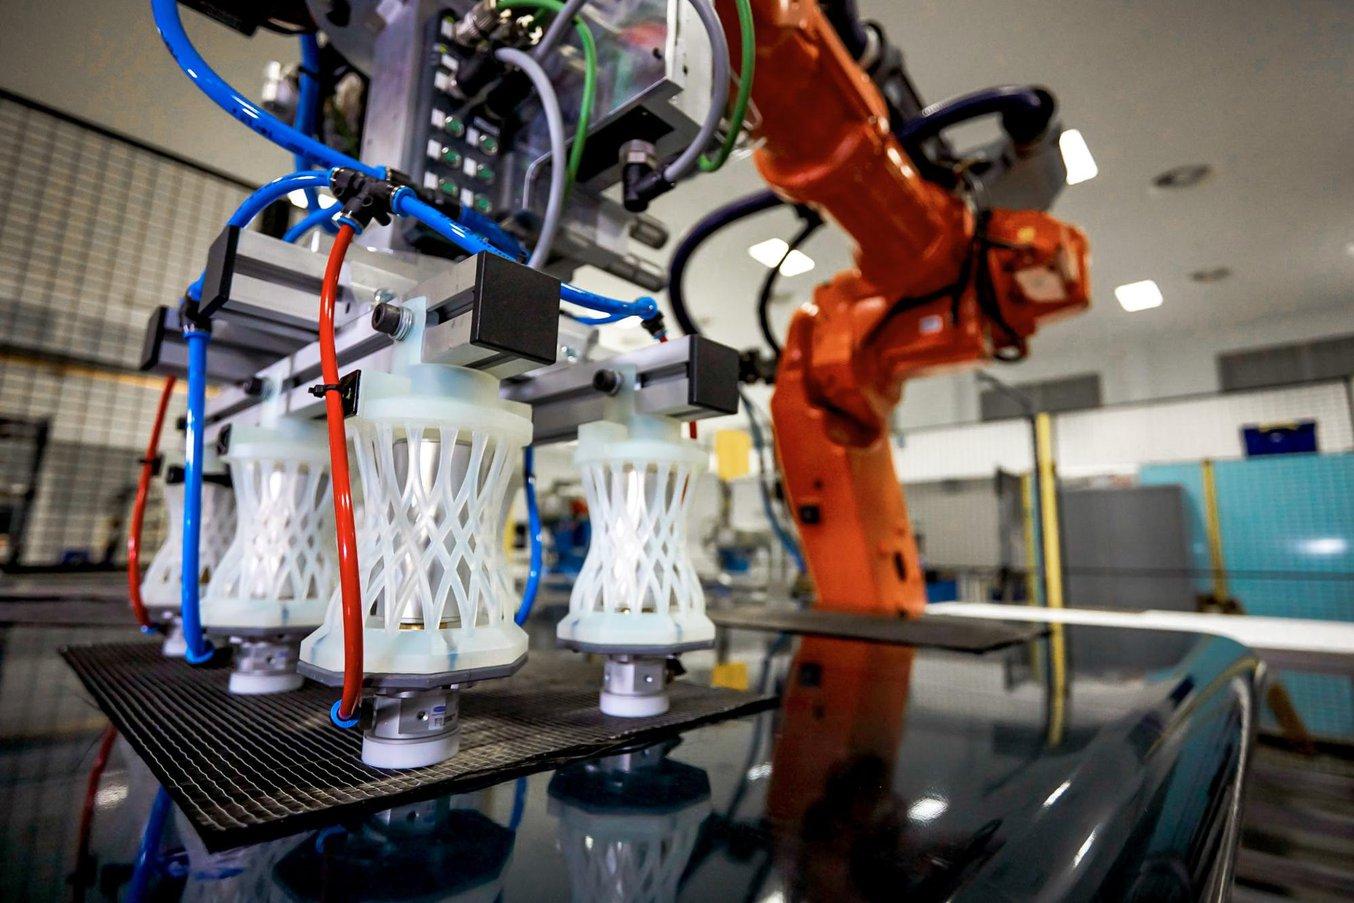 Engineers at the AMRC use a fleet of 12 SLA 3D printers and a variety of engineering materials to print custom parts for diverse research projects, like brackets for a pick and place robot